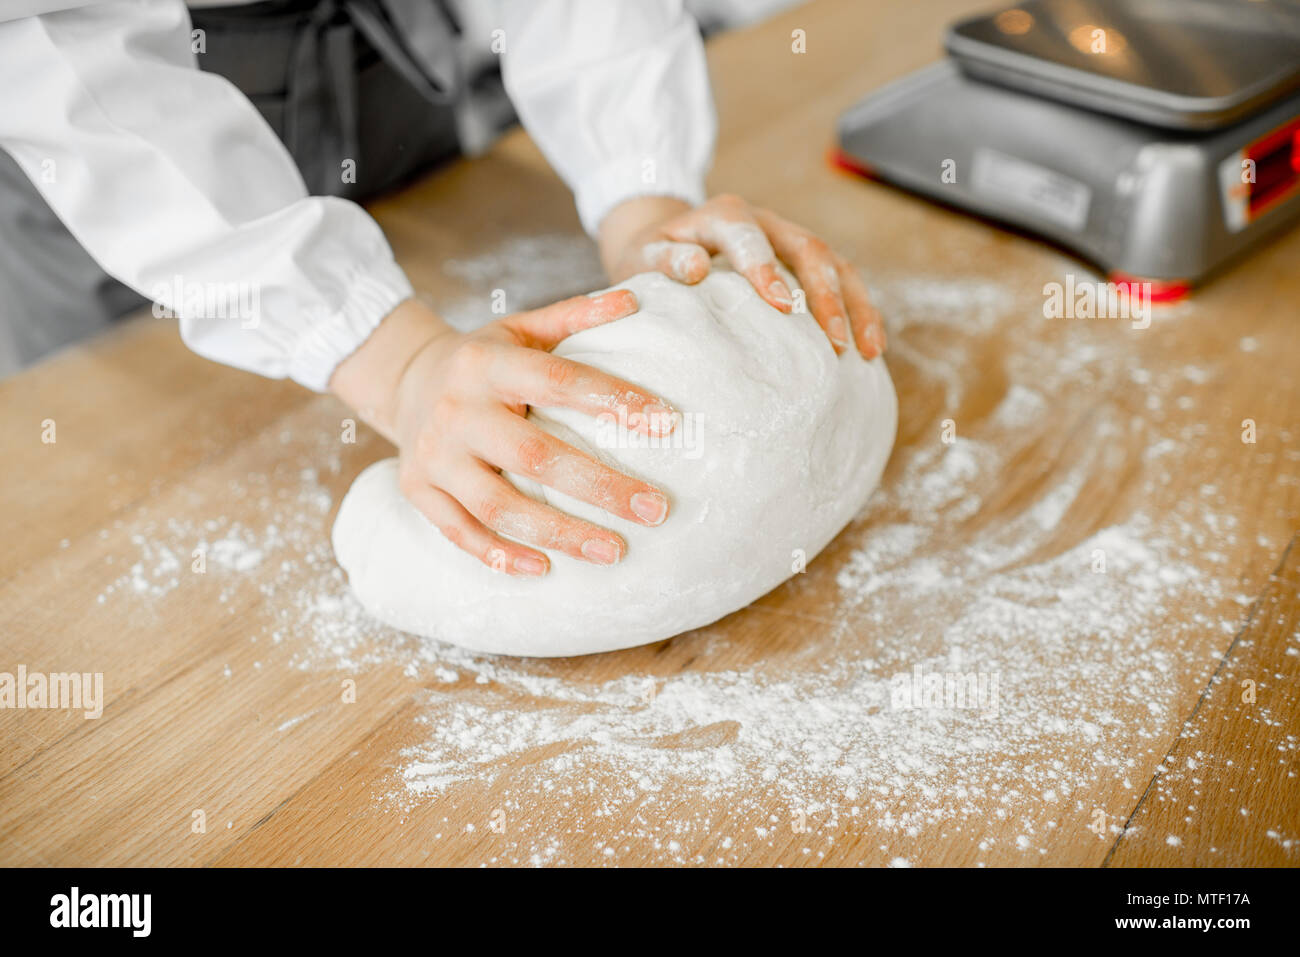 Baker forming daugh with hands for baking on the wooden table at the manufacturing Stock Photo